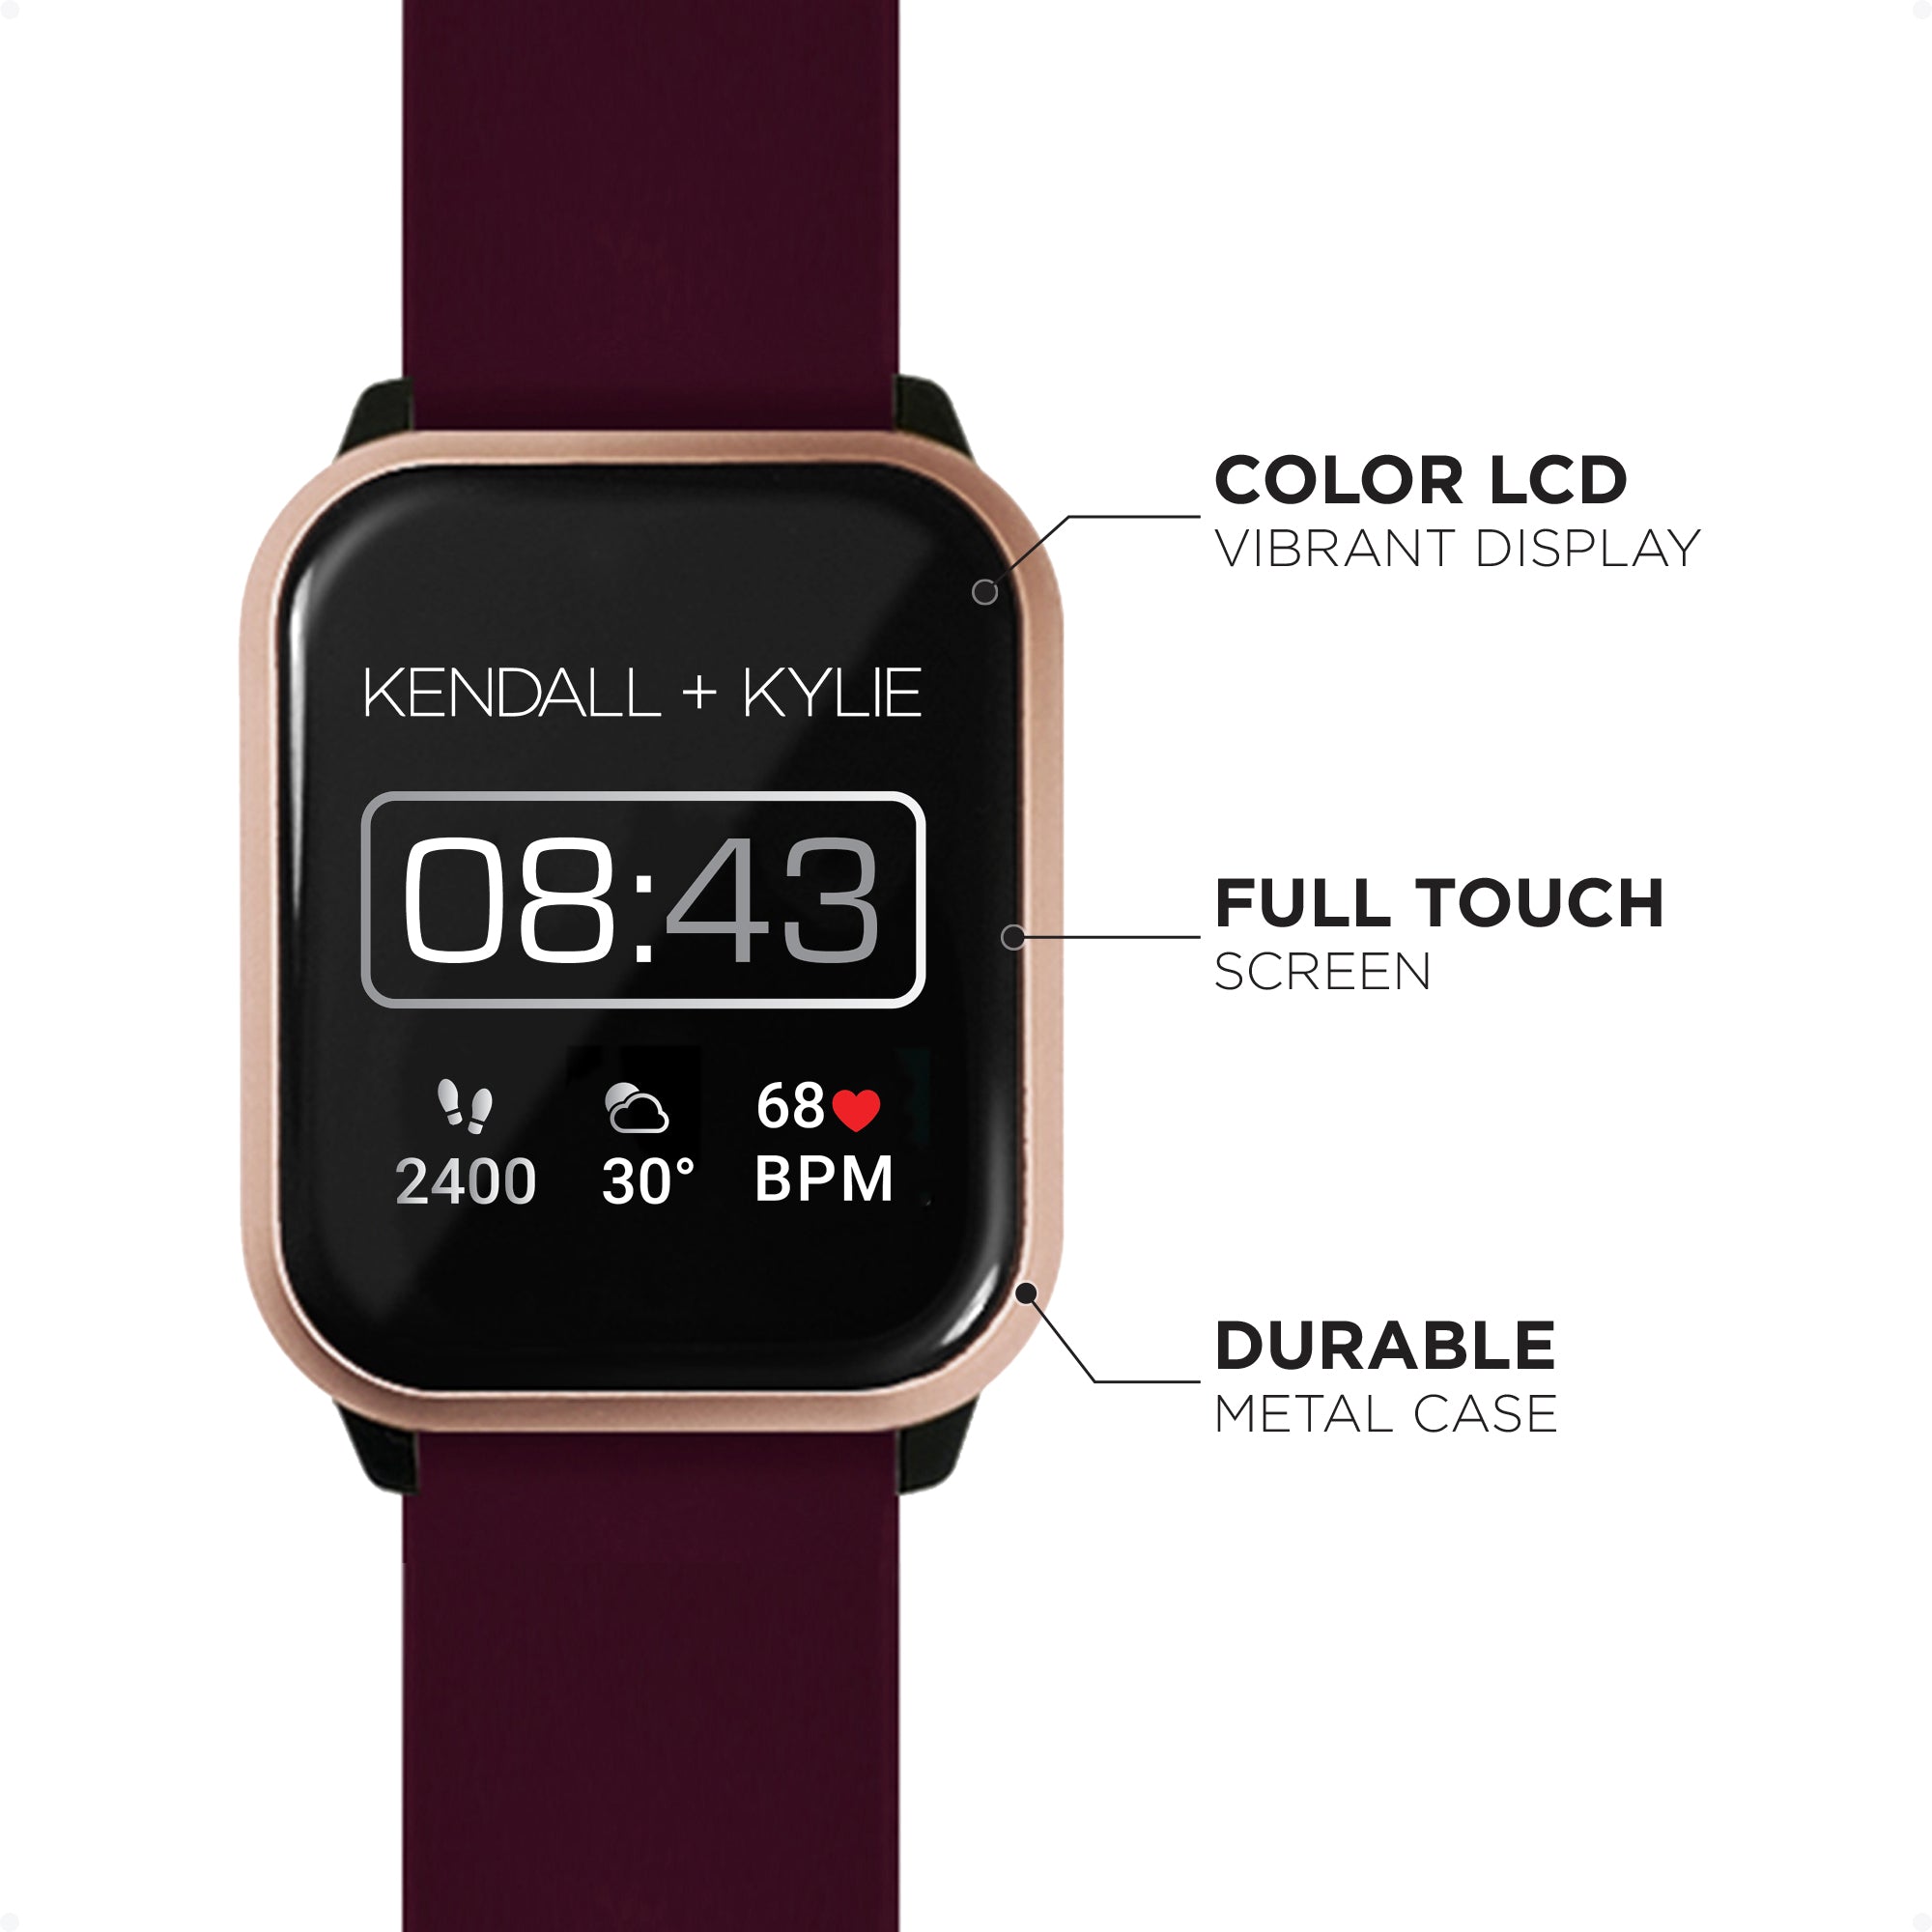 Kendall + Kylie: Smartwatch with Rose Gold Case and Merlot/Blush Straps 40mm affordable smart watch